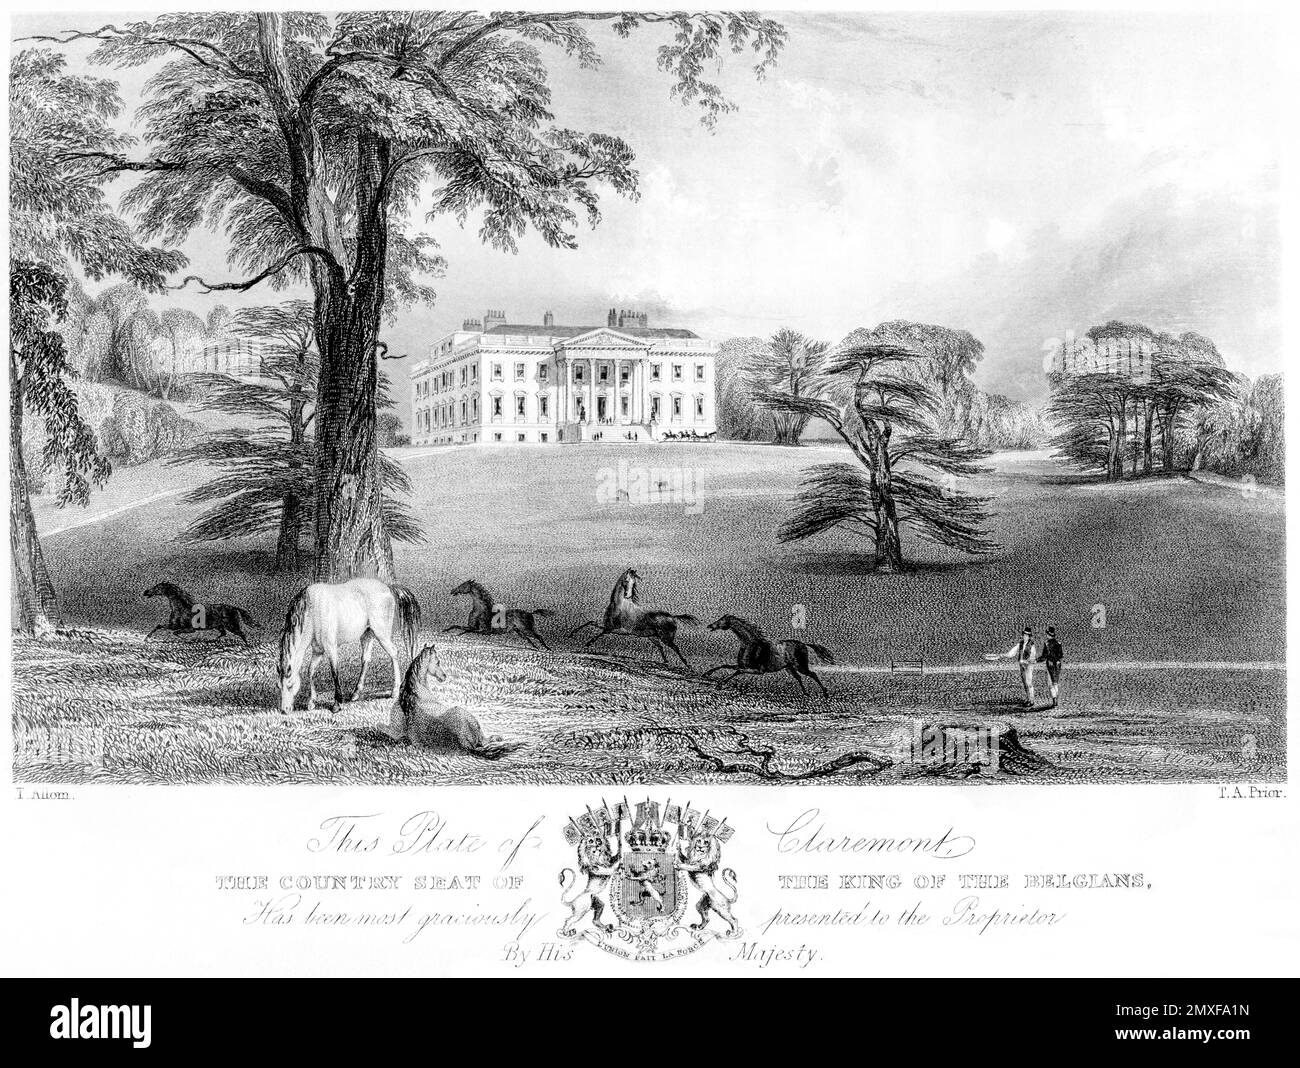 An engraving of Claremont, the Country Seat of the King of the Belgians, Esher, Surrey UK scanned at high resolution from a book printed in 1850. This Stock Photo